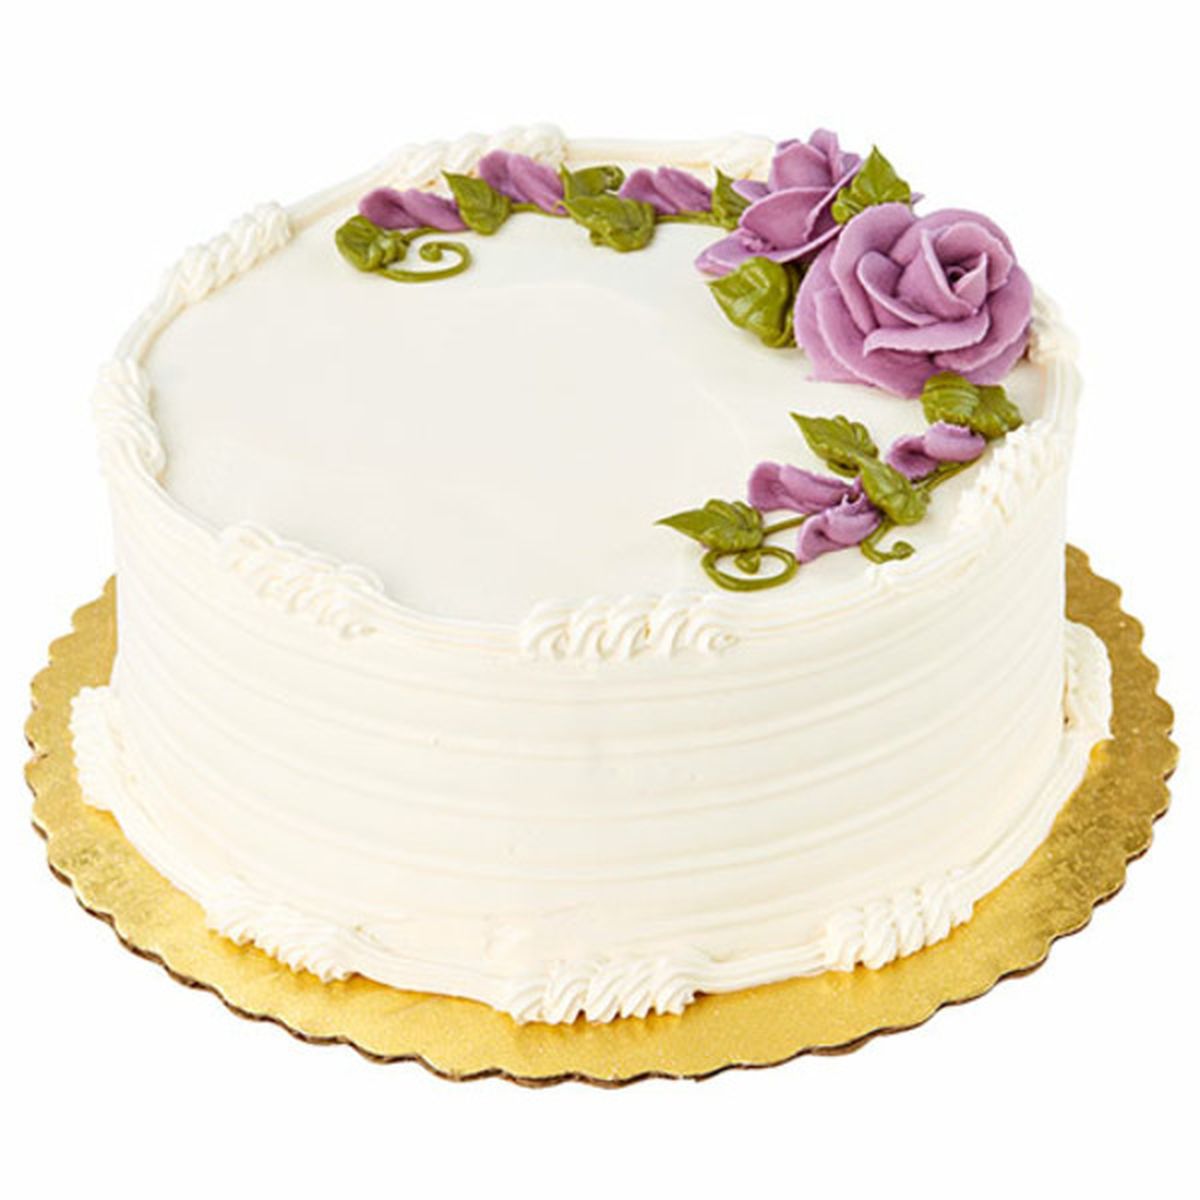 Calories in Wegmans Round 2 Layer Gold Cake with Buttercreme